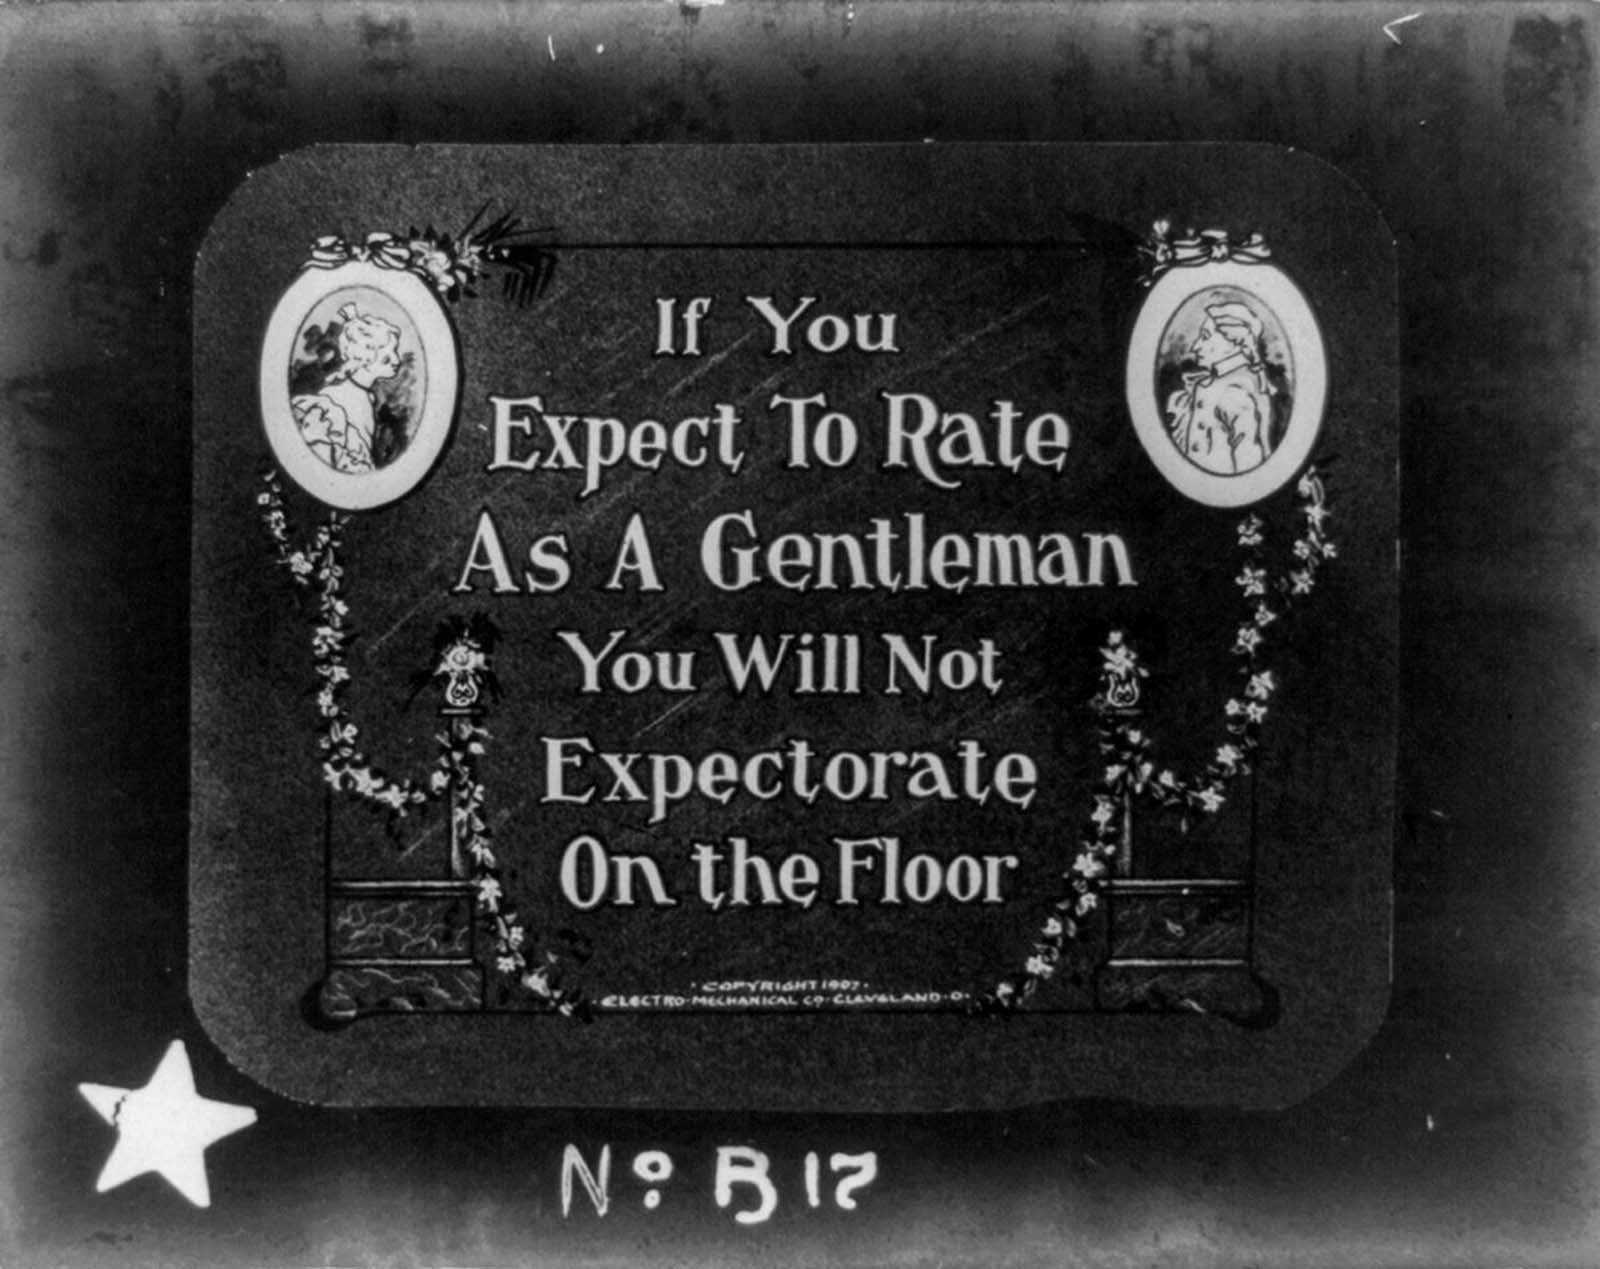 Bizarre Rules and etiquette from the 1910s that early Movie-goers had to follow